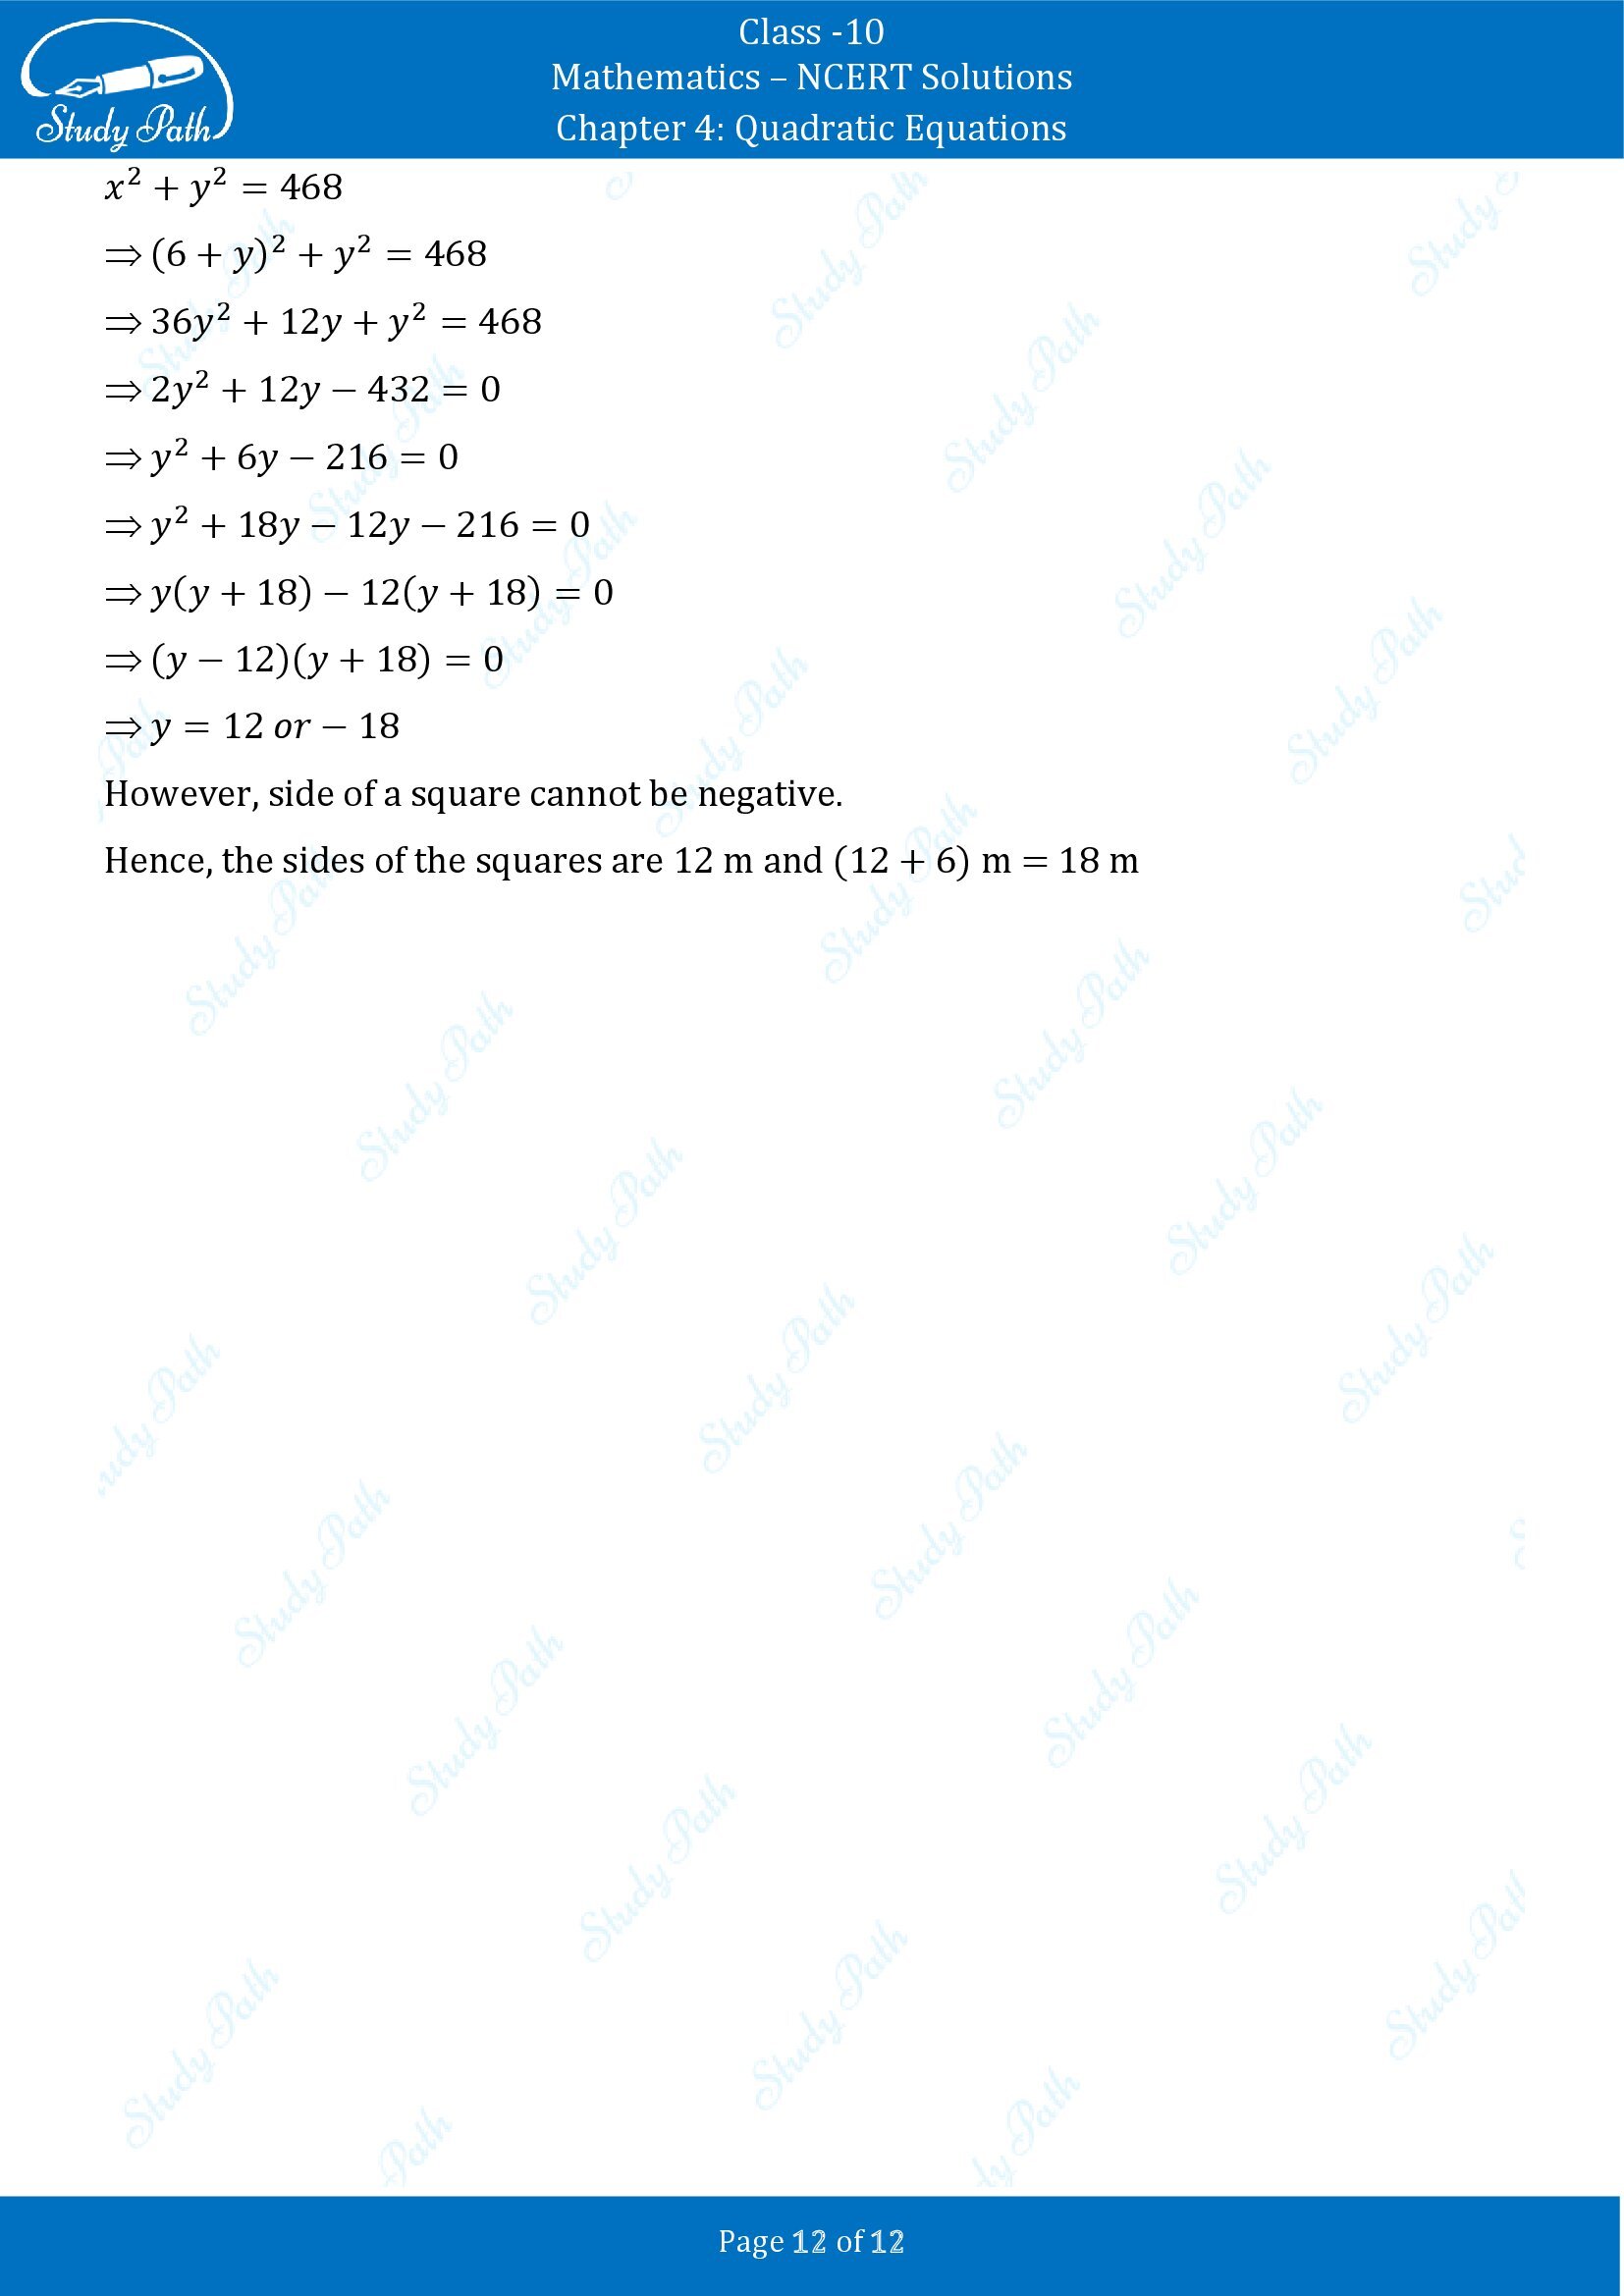 NCERT Solutions for Class 10 Maths Chapter 4 Quadratic Equations Exercise 4.3 0012